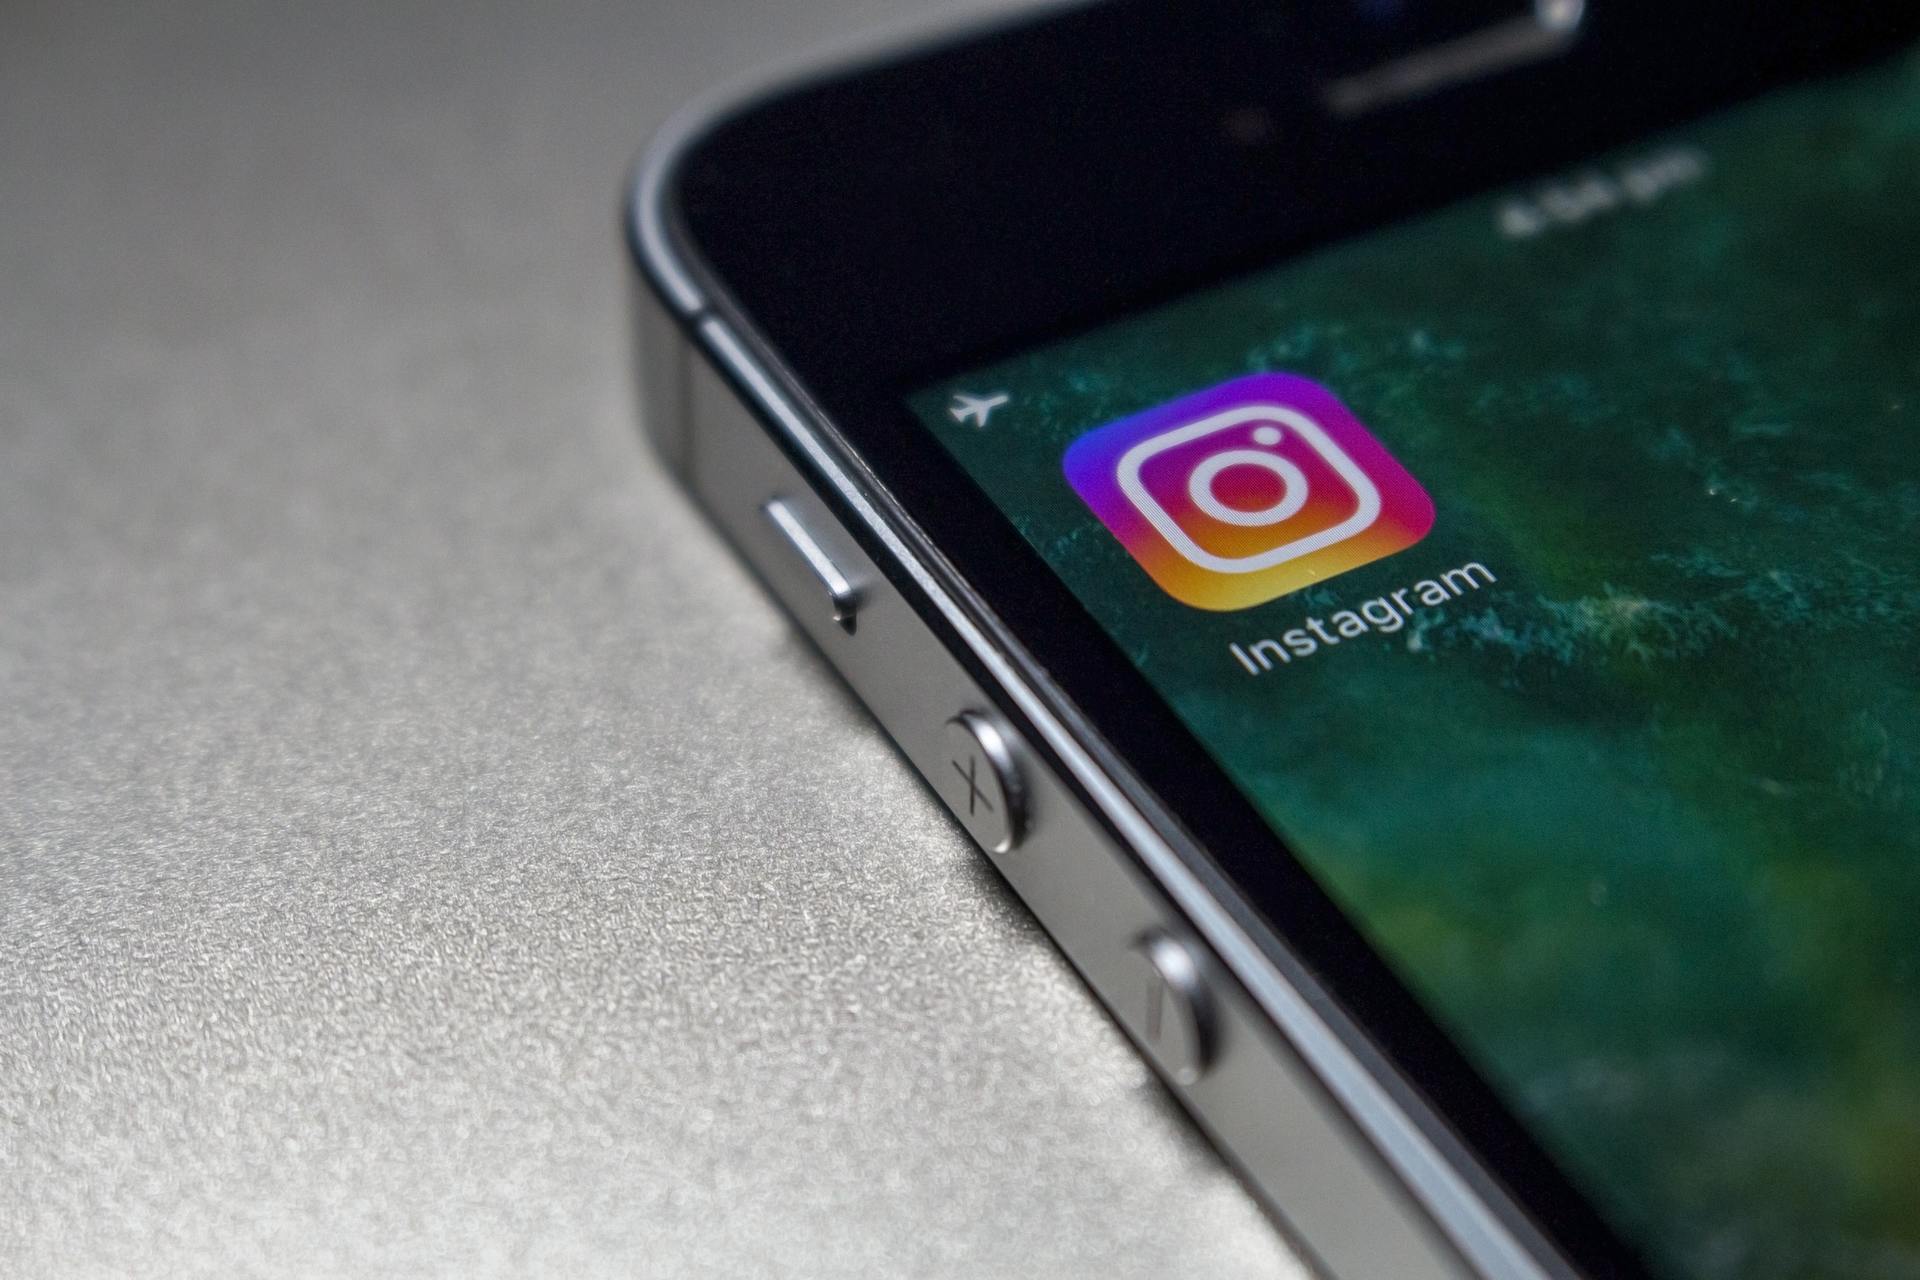 A close up image of an Instagram icon on a mobile device